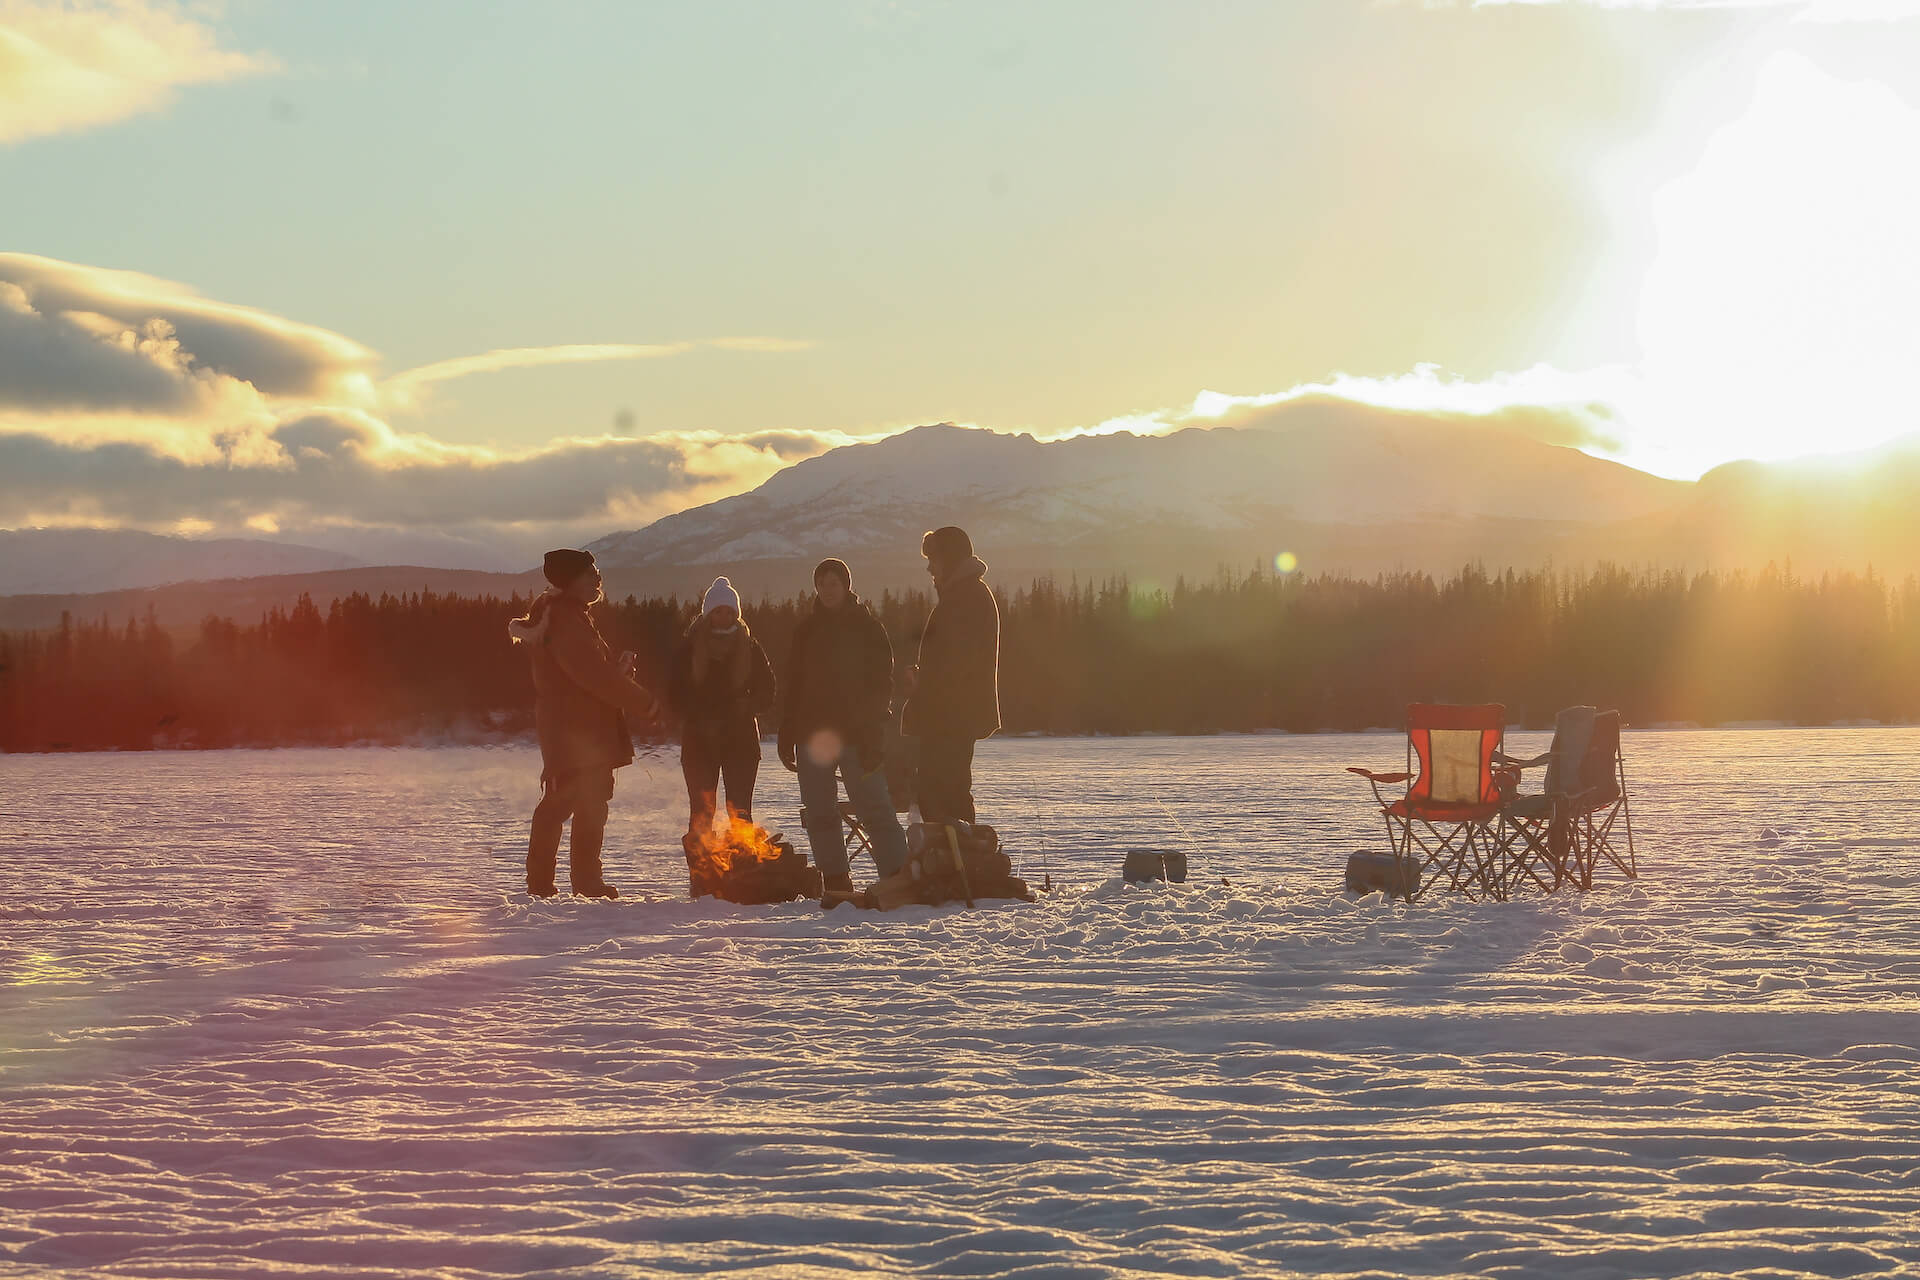 Ice Fishing at Red Cariboo Resort: Ice fishing is one of the most popular winter activity in Canada but you have to dress warm because you will be outside for hours.